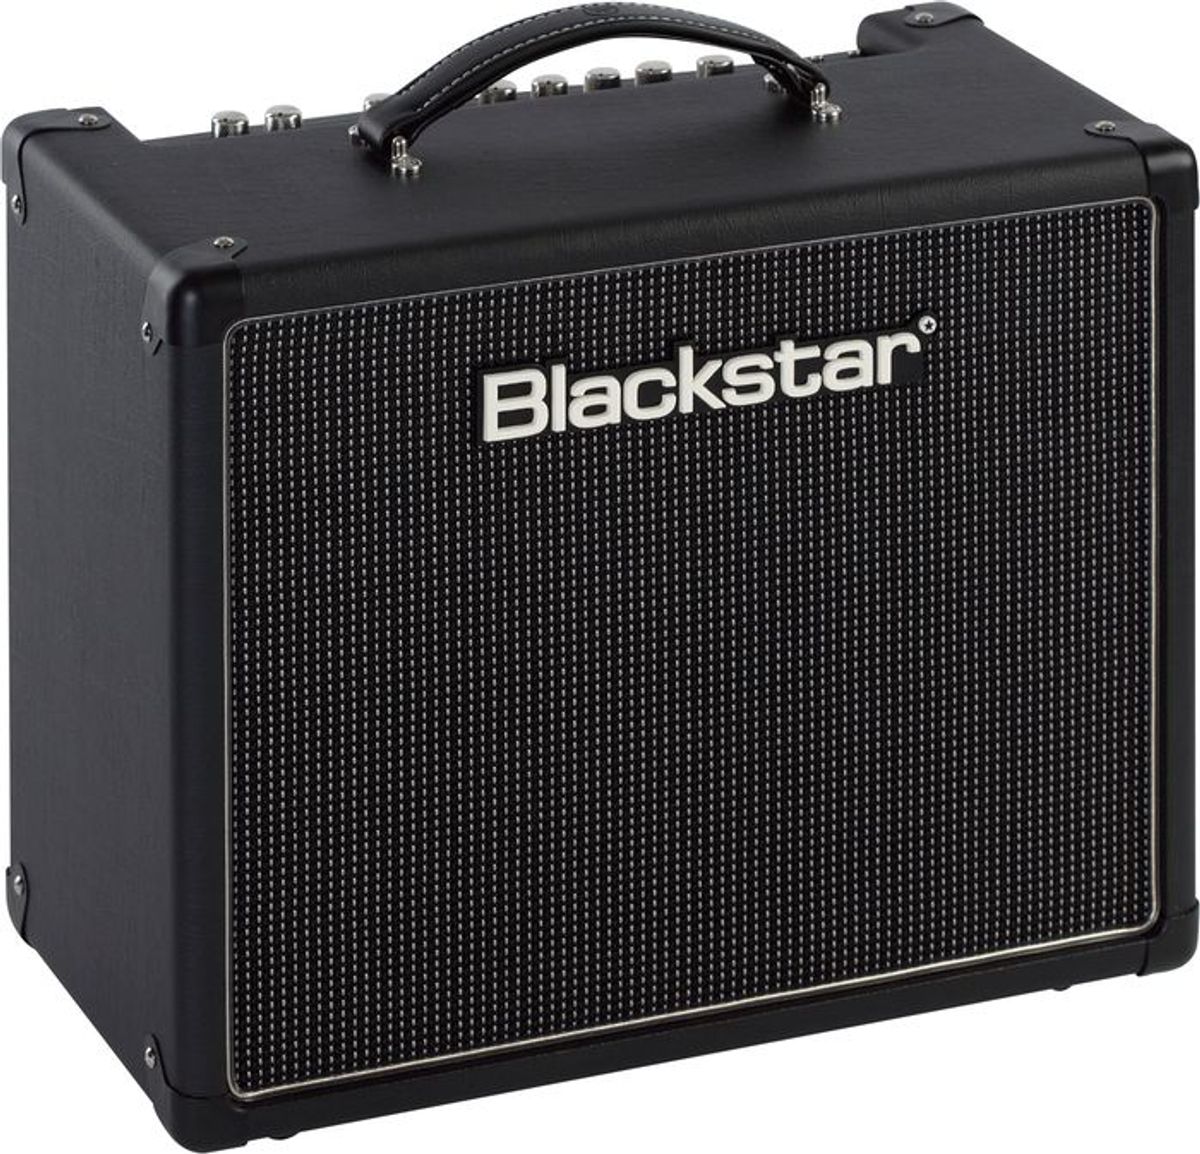 Save up to 30% on a Blackstar HT5R (Full Tube) Guitar Amplifier